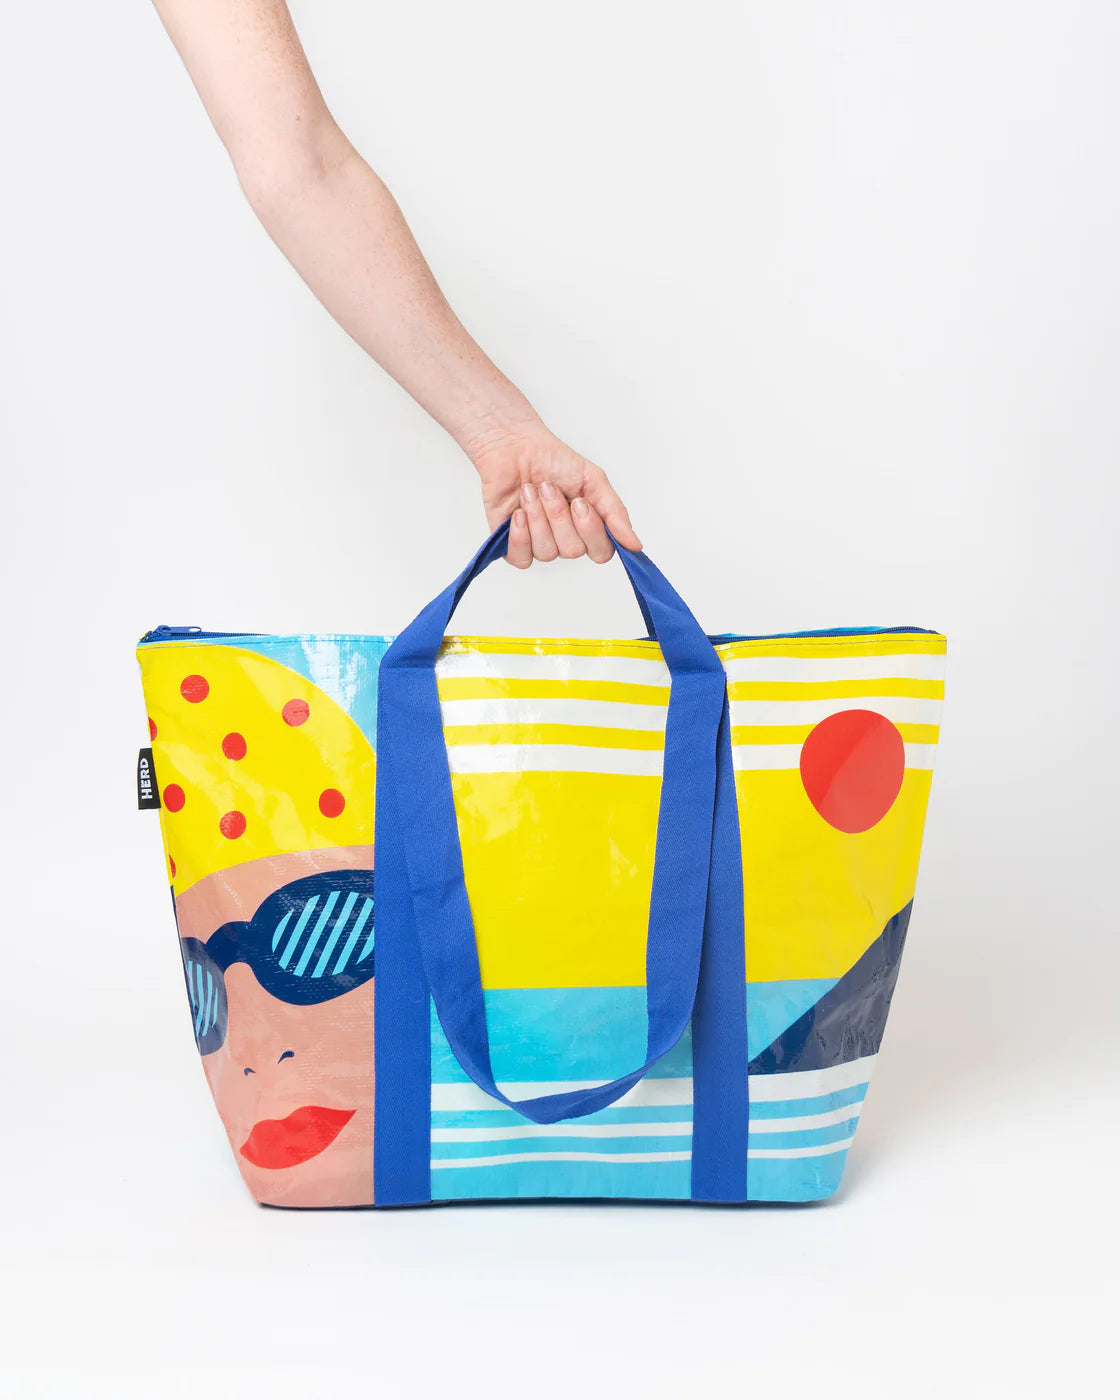 The Swimmer Tote Bag